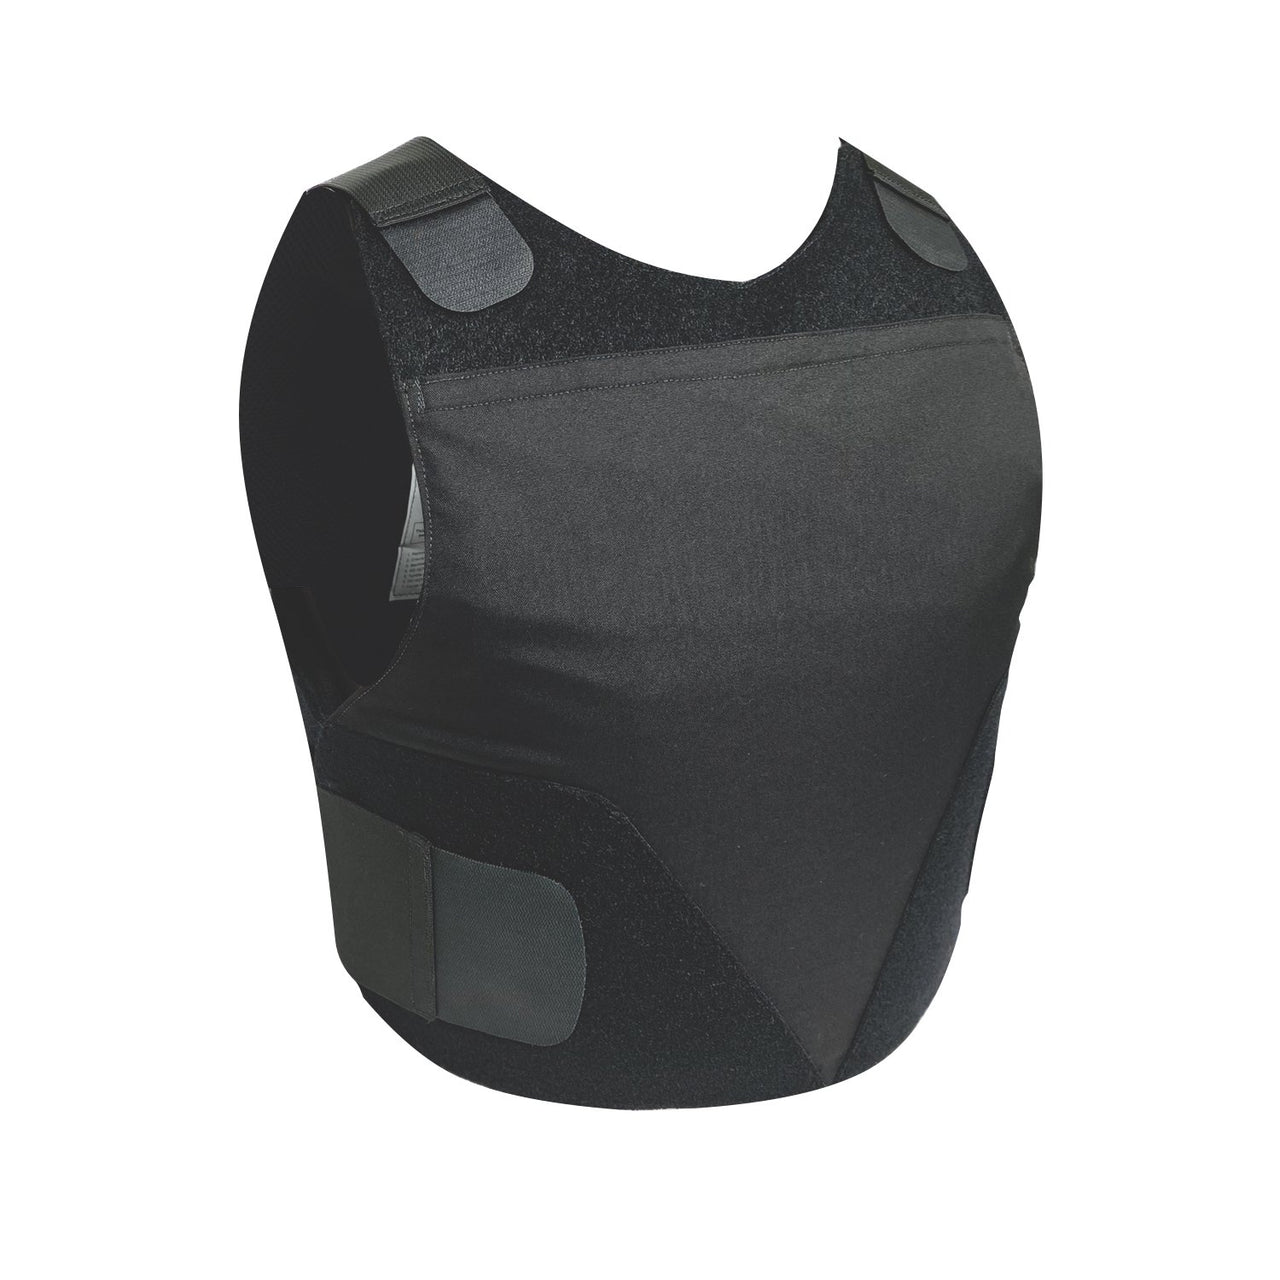 A Body Armor Direct All American Concealable Carrier vest on a white background.